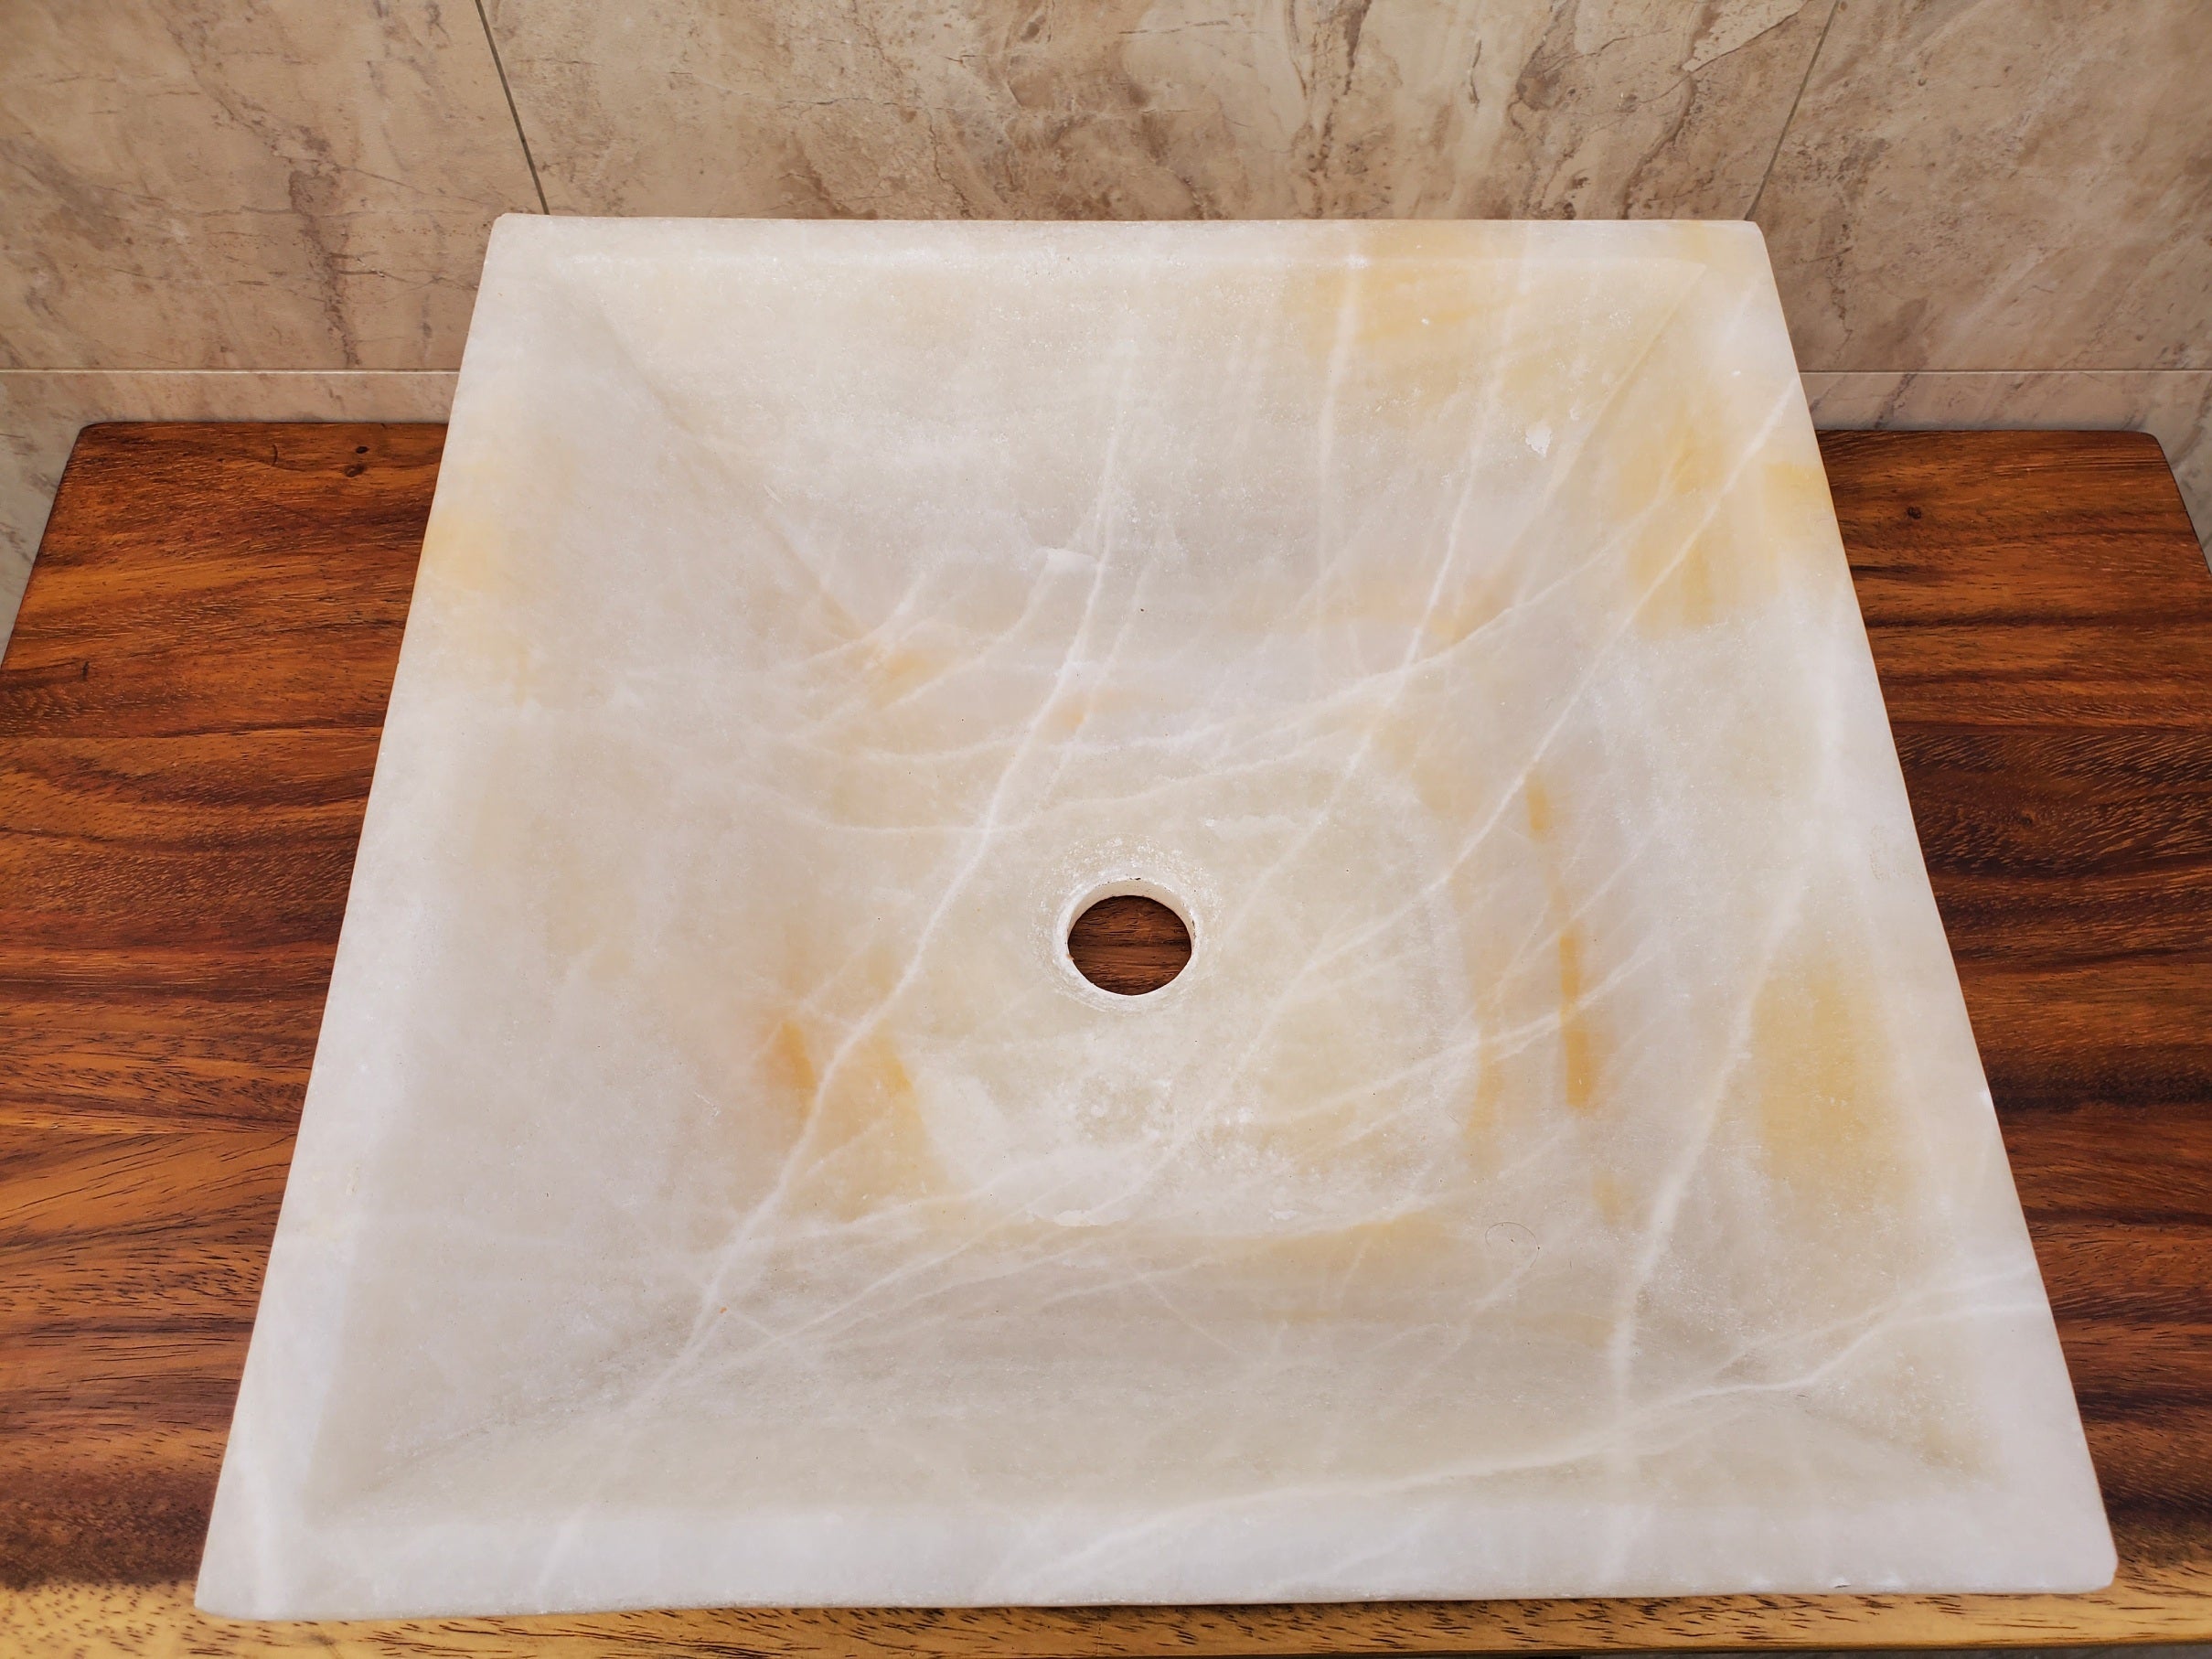 Orange and White Square Onyx Vessel Sink. Handmade in Mexico. We hand finish and ship from the USA. Buy now at www.felipeandgrace.com.